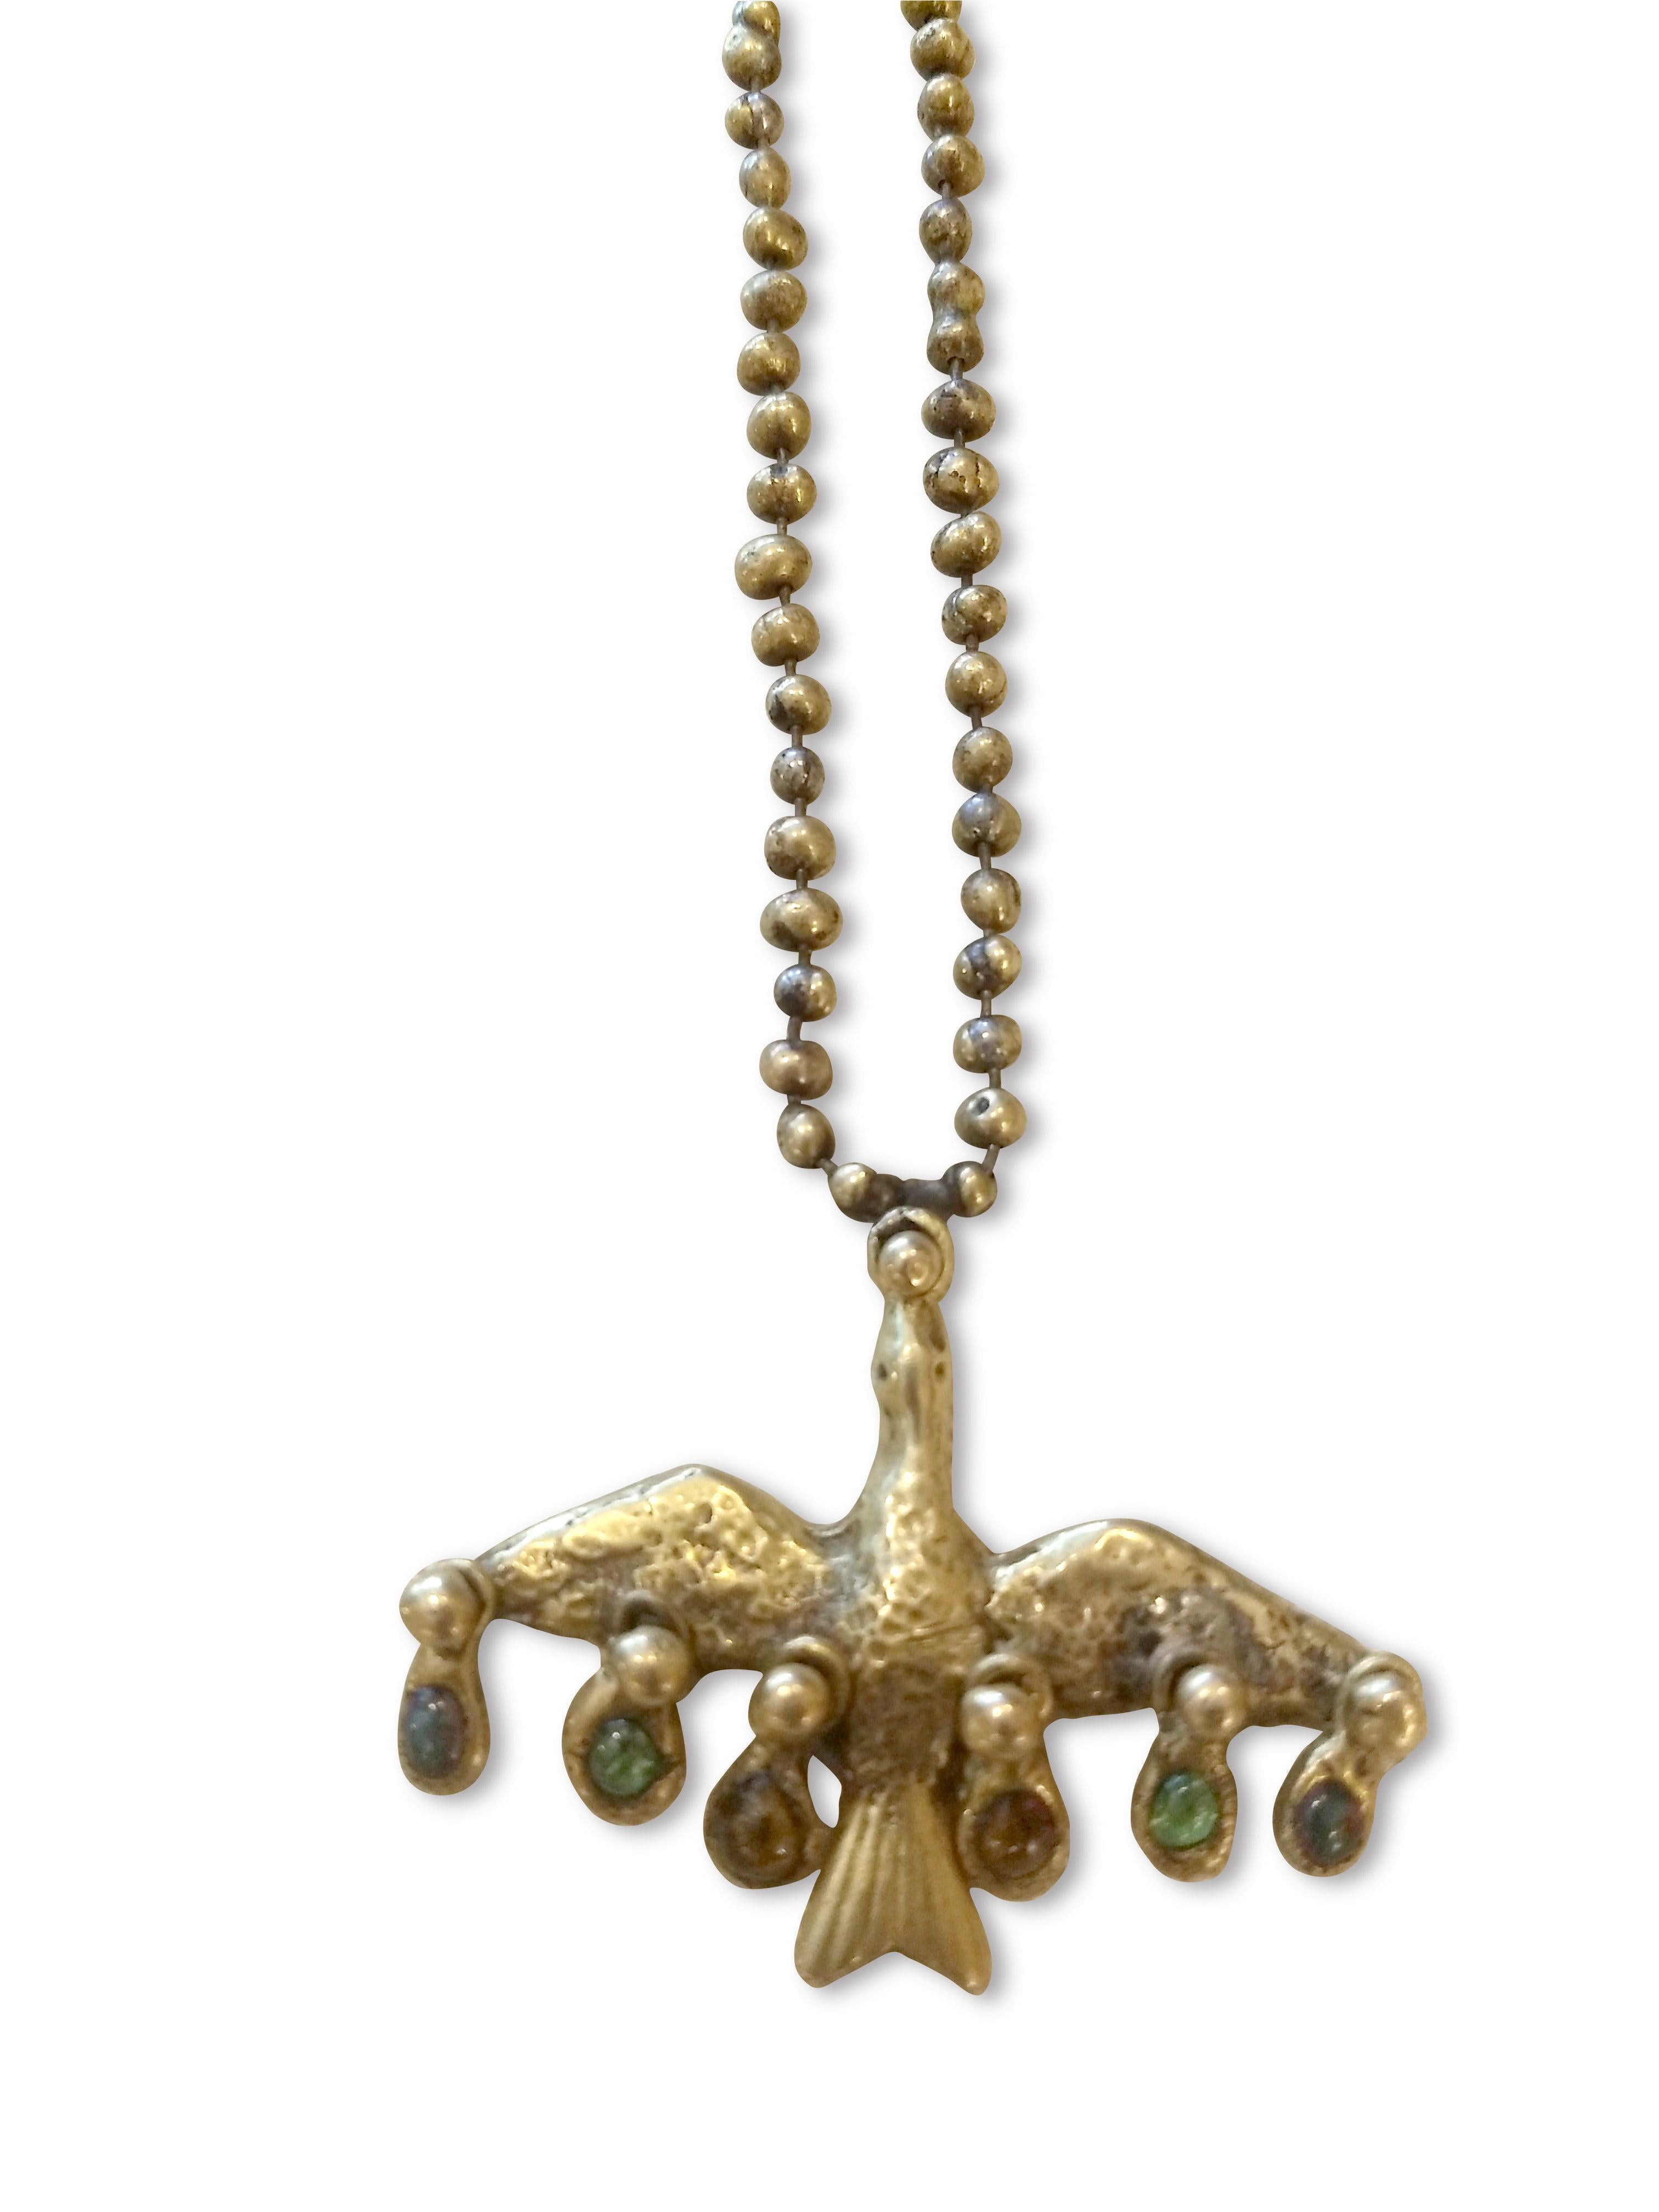 Cast Brutalist Necklace with Bird and Small Glass Stones by Pal Kepenyes